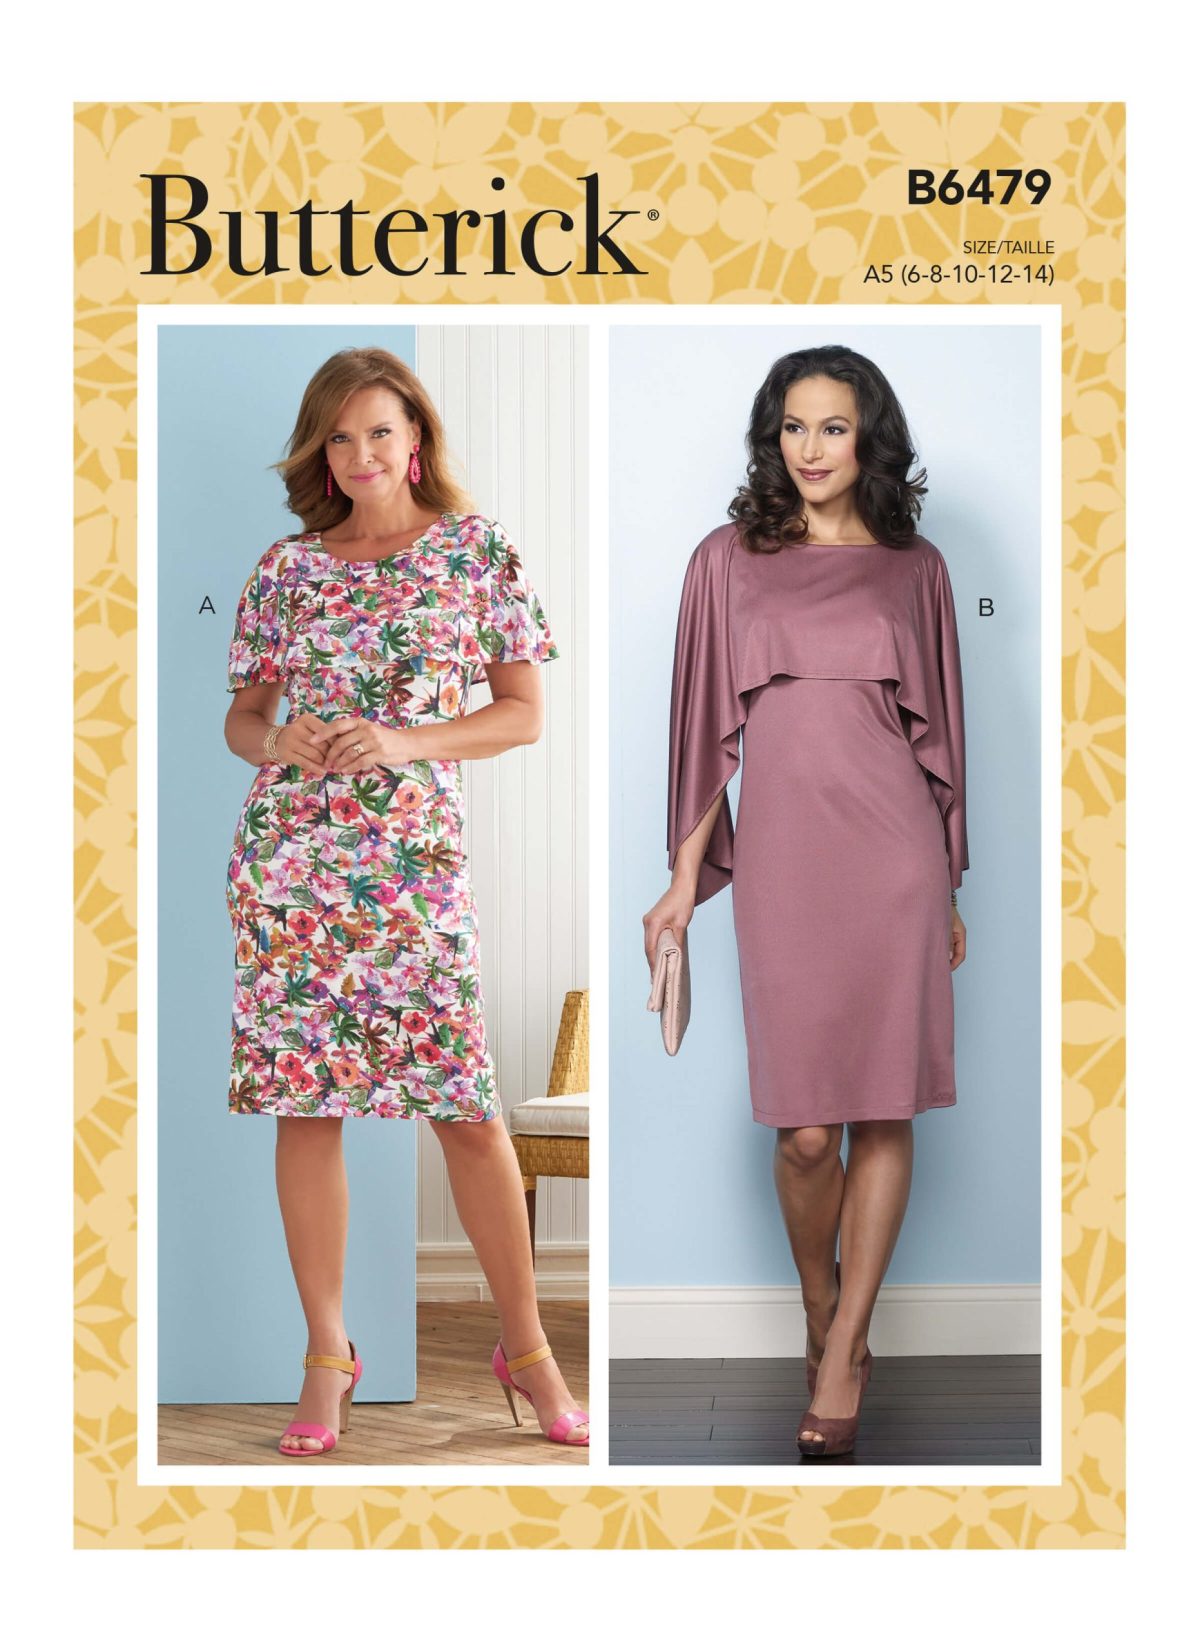 Butterick Sewing Patterns B6479 Misses' Dresses with Attached Capelets